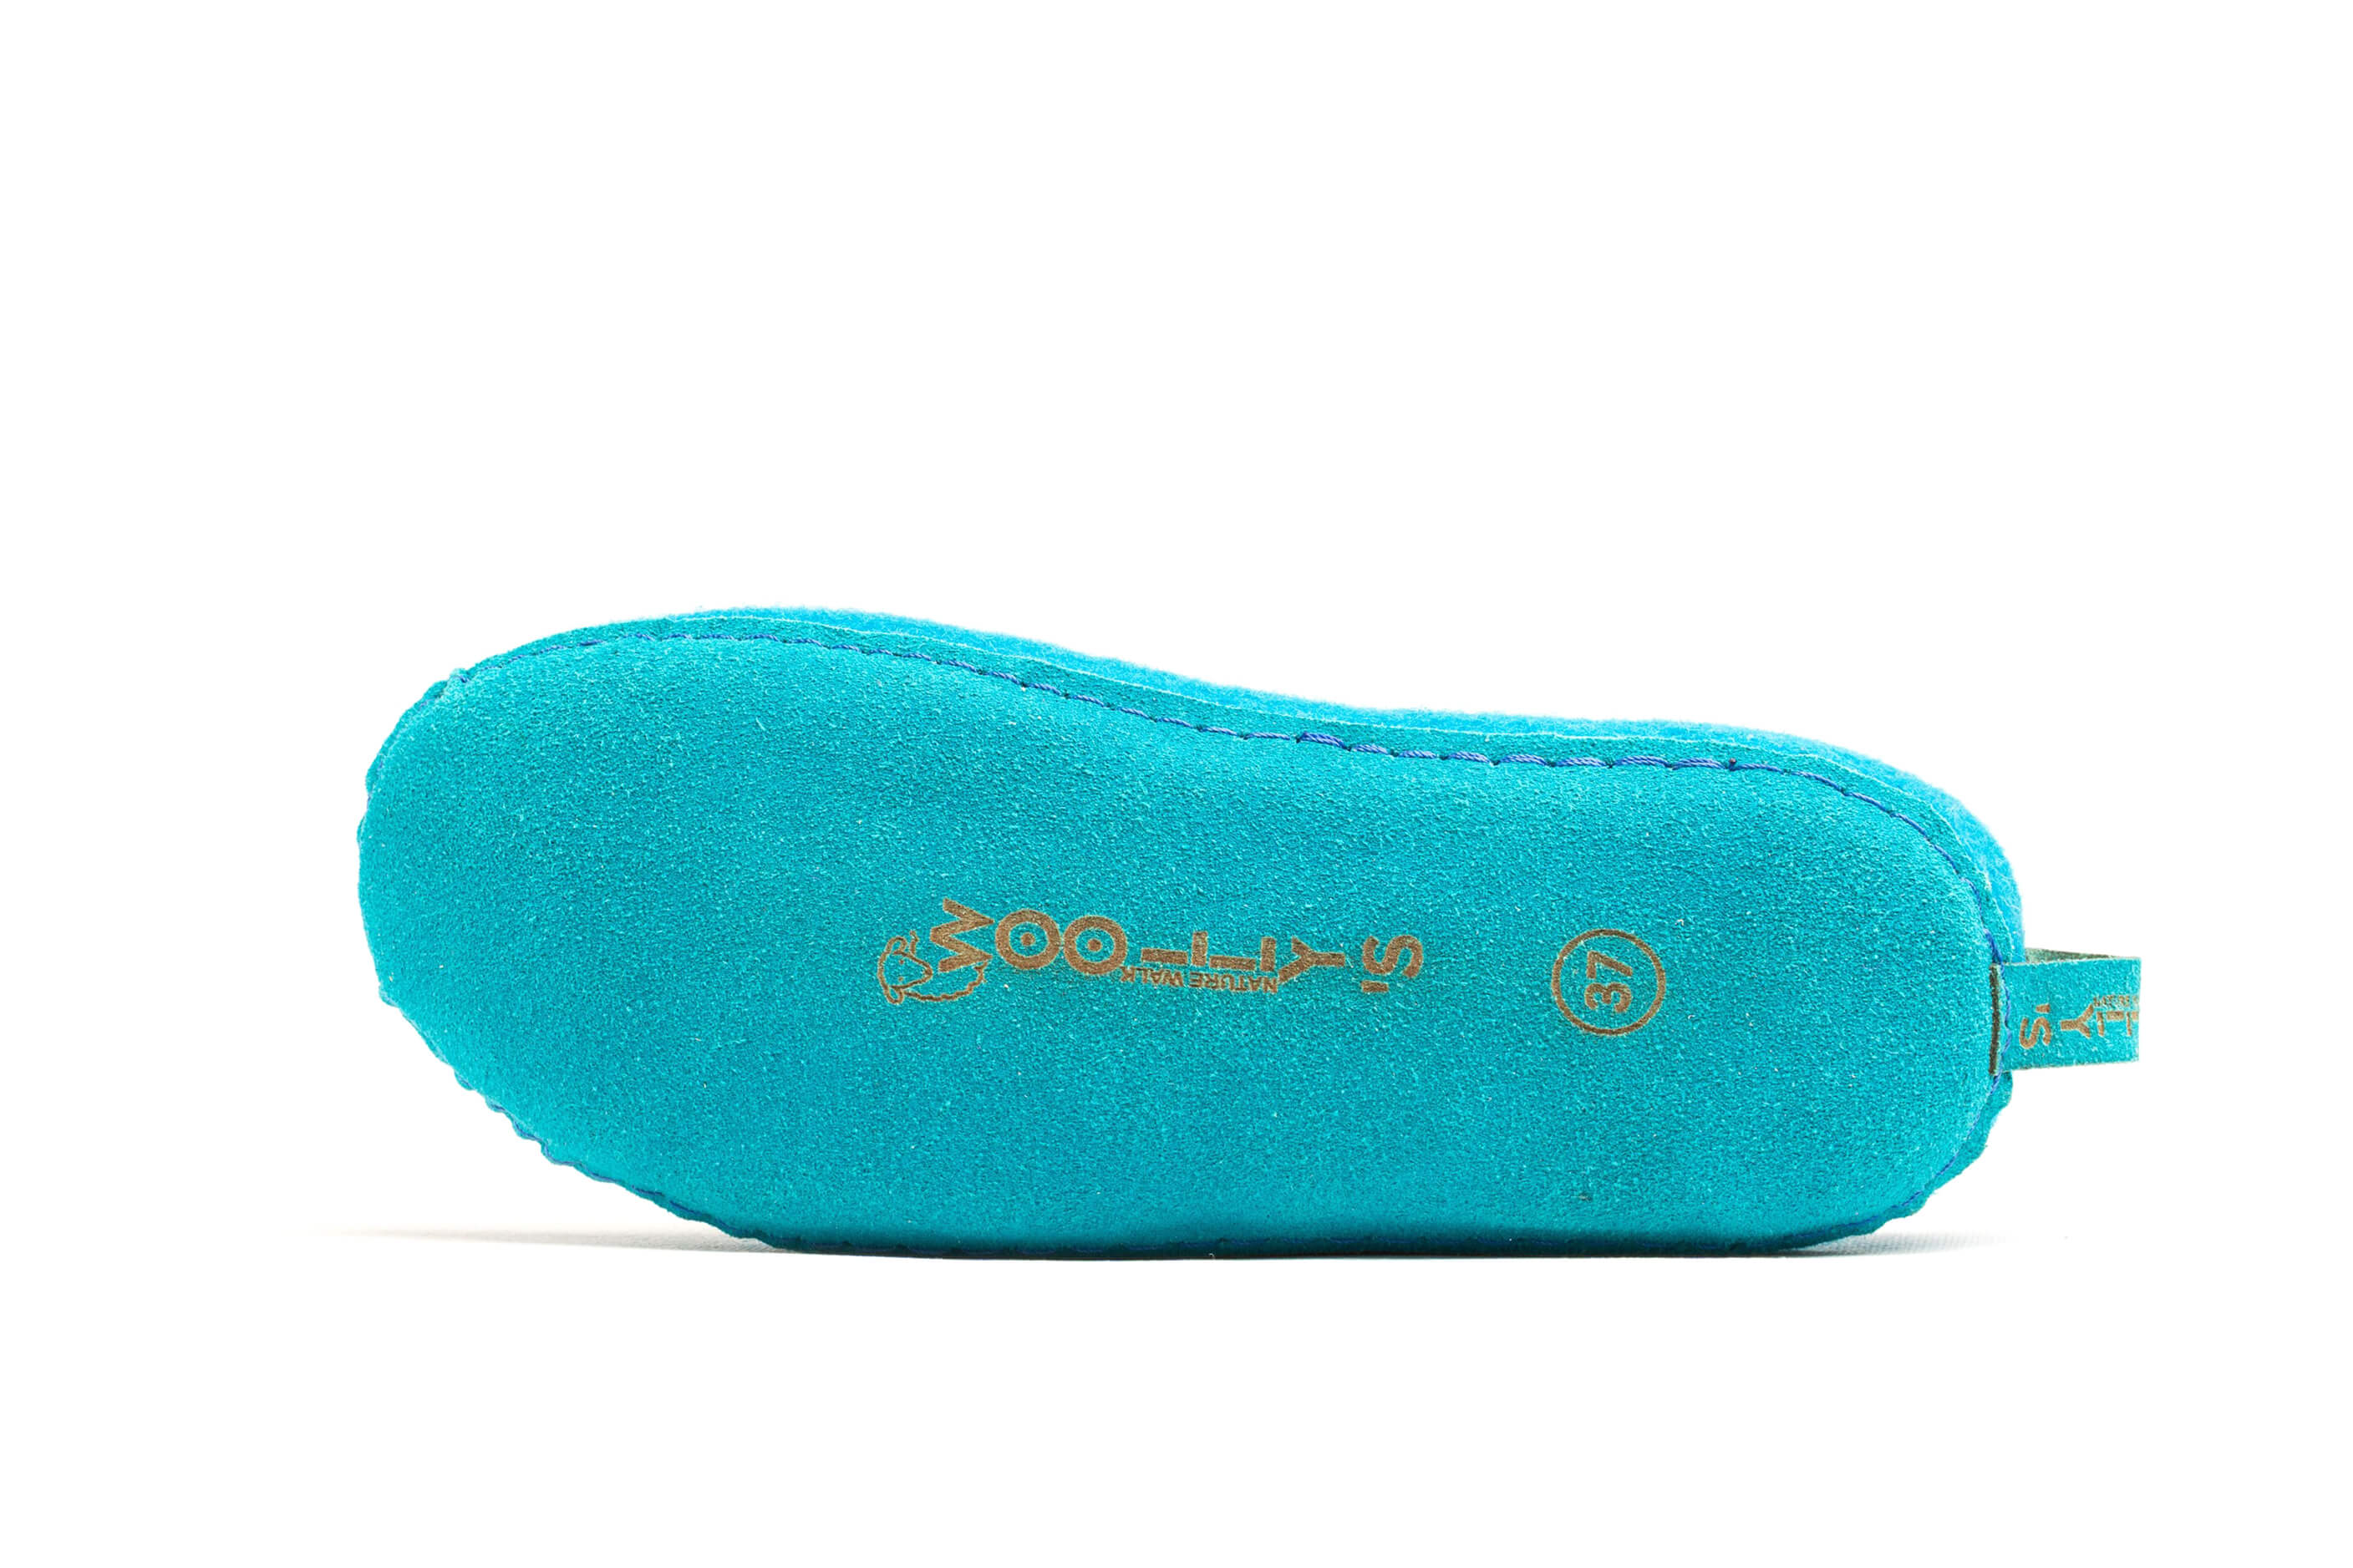 Indoor Open Heel Slippers With Leather Sole - Turquoise